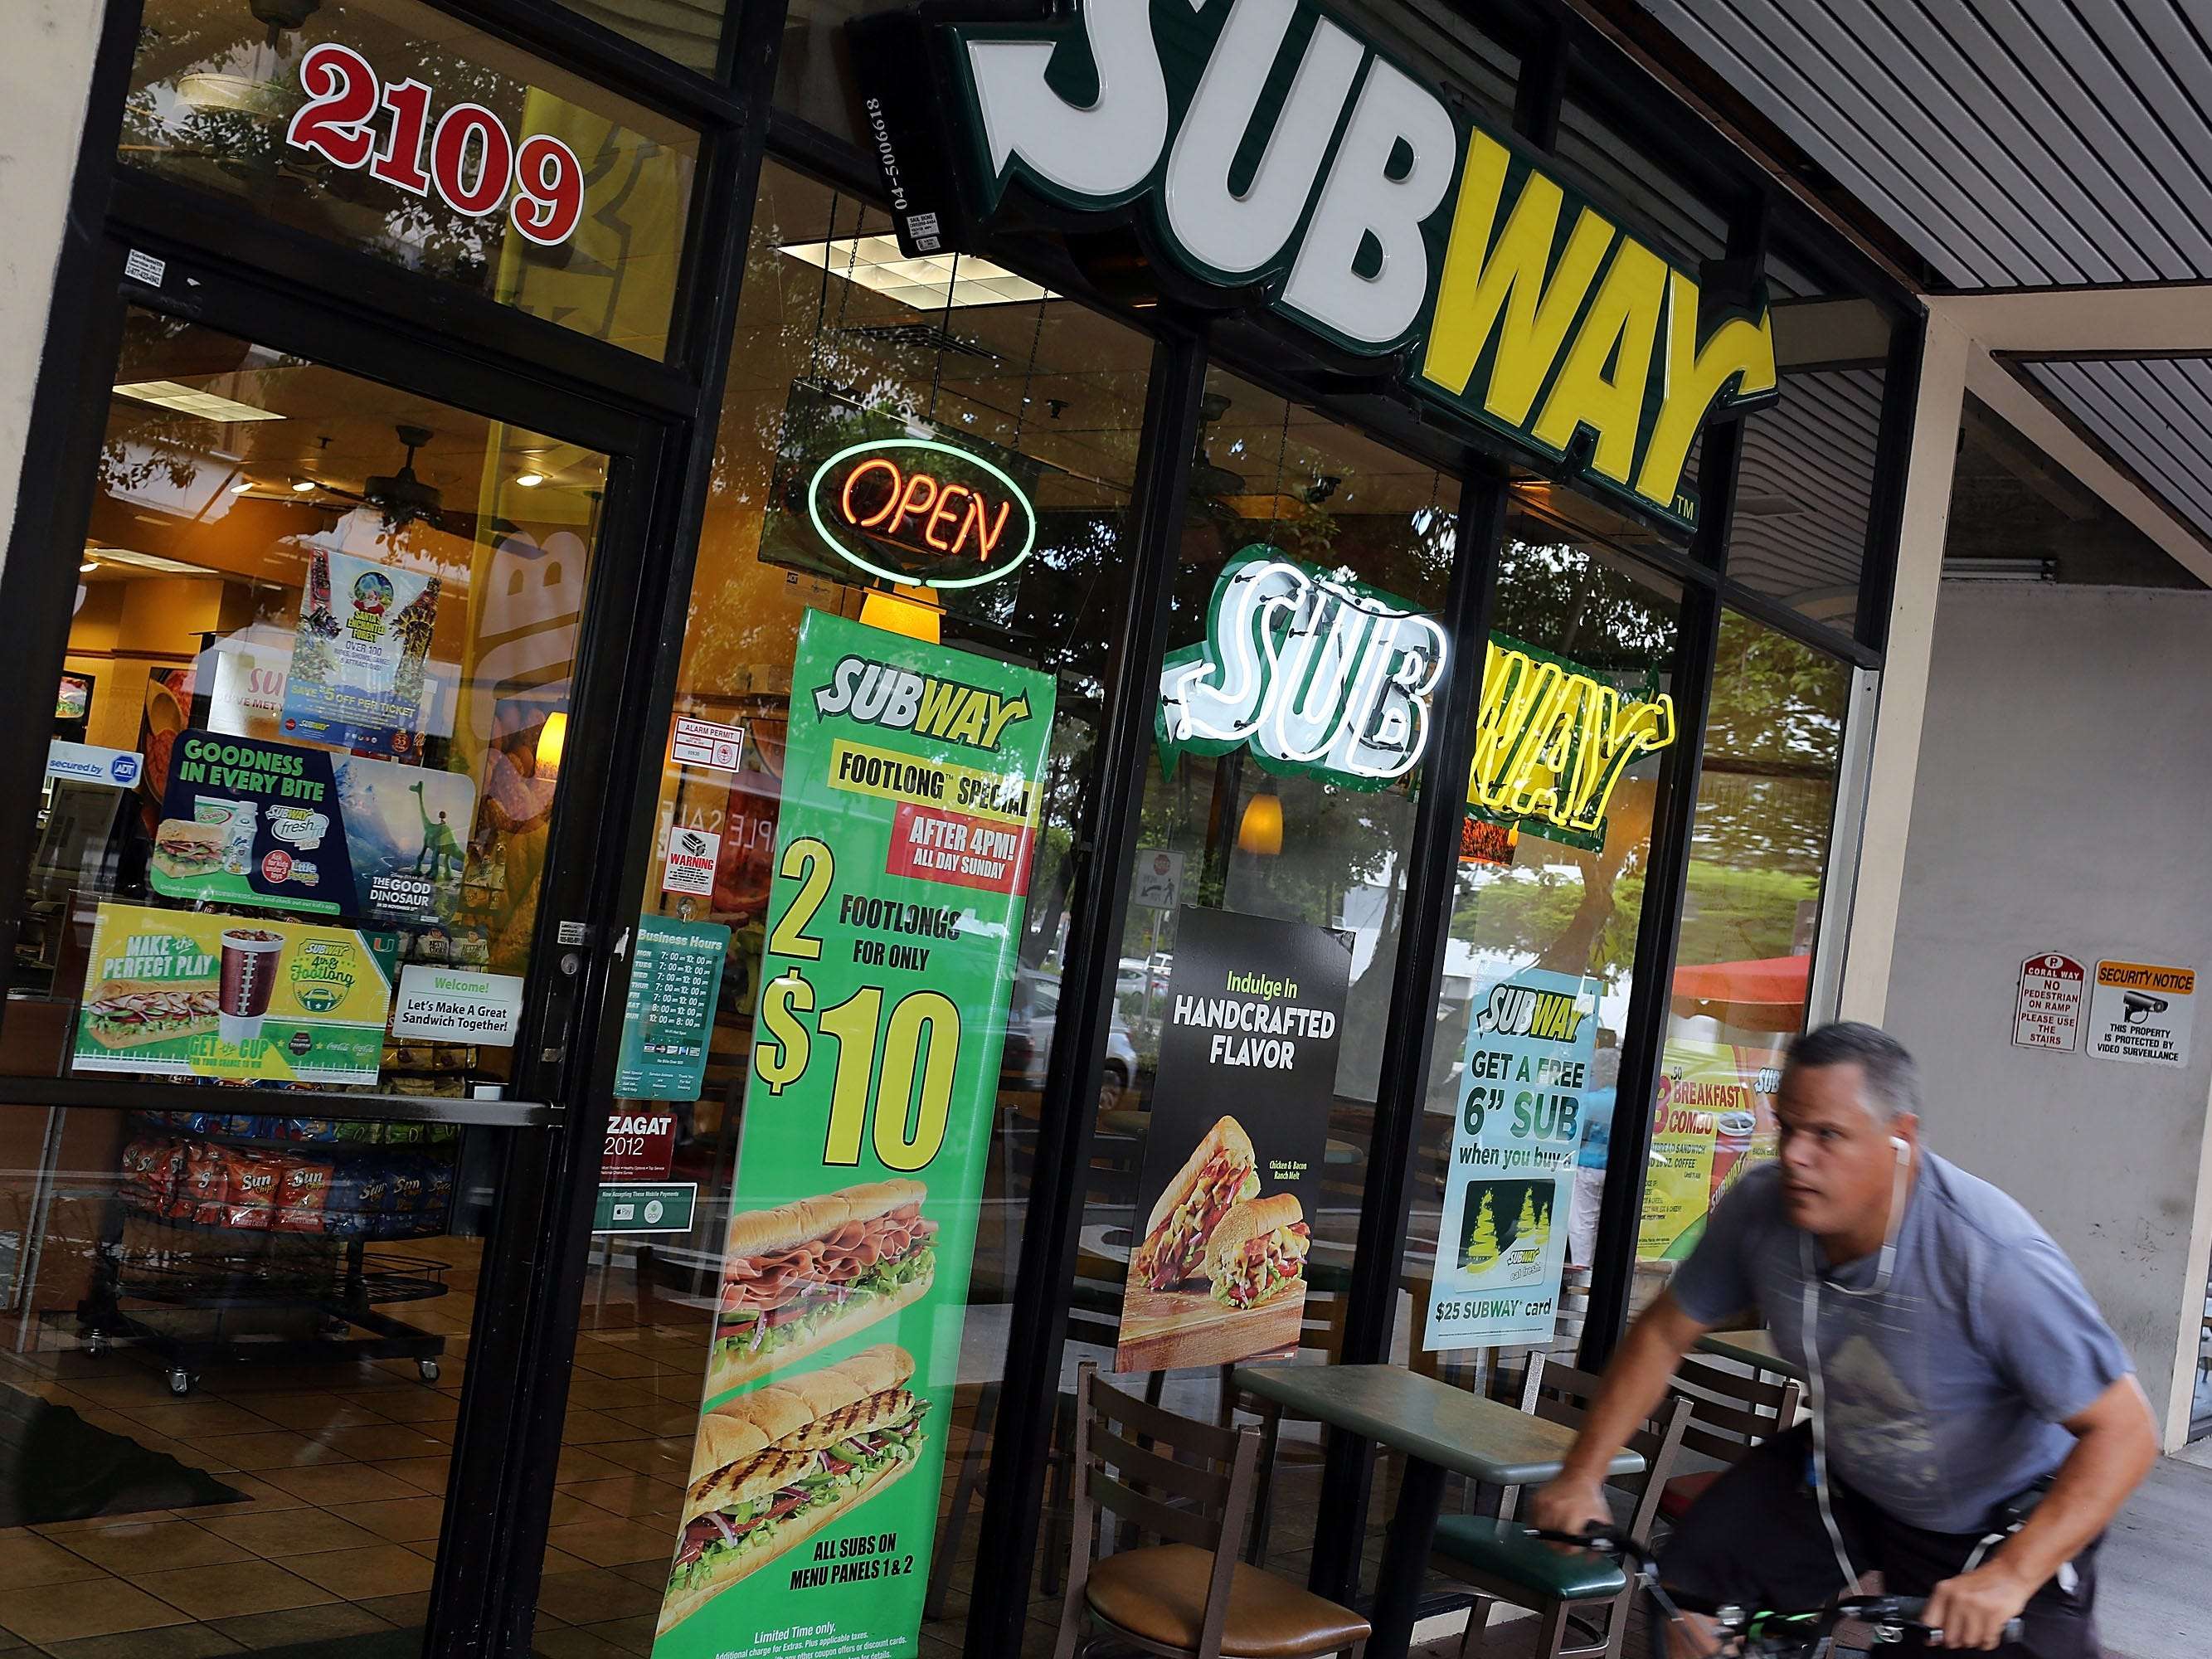 Subway is closing half its restaurants early on July 12 to overhaul the